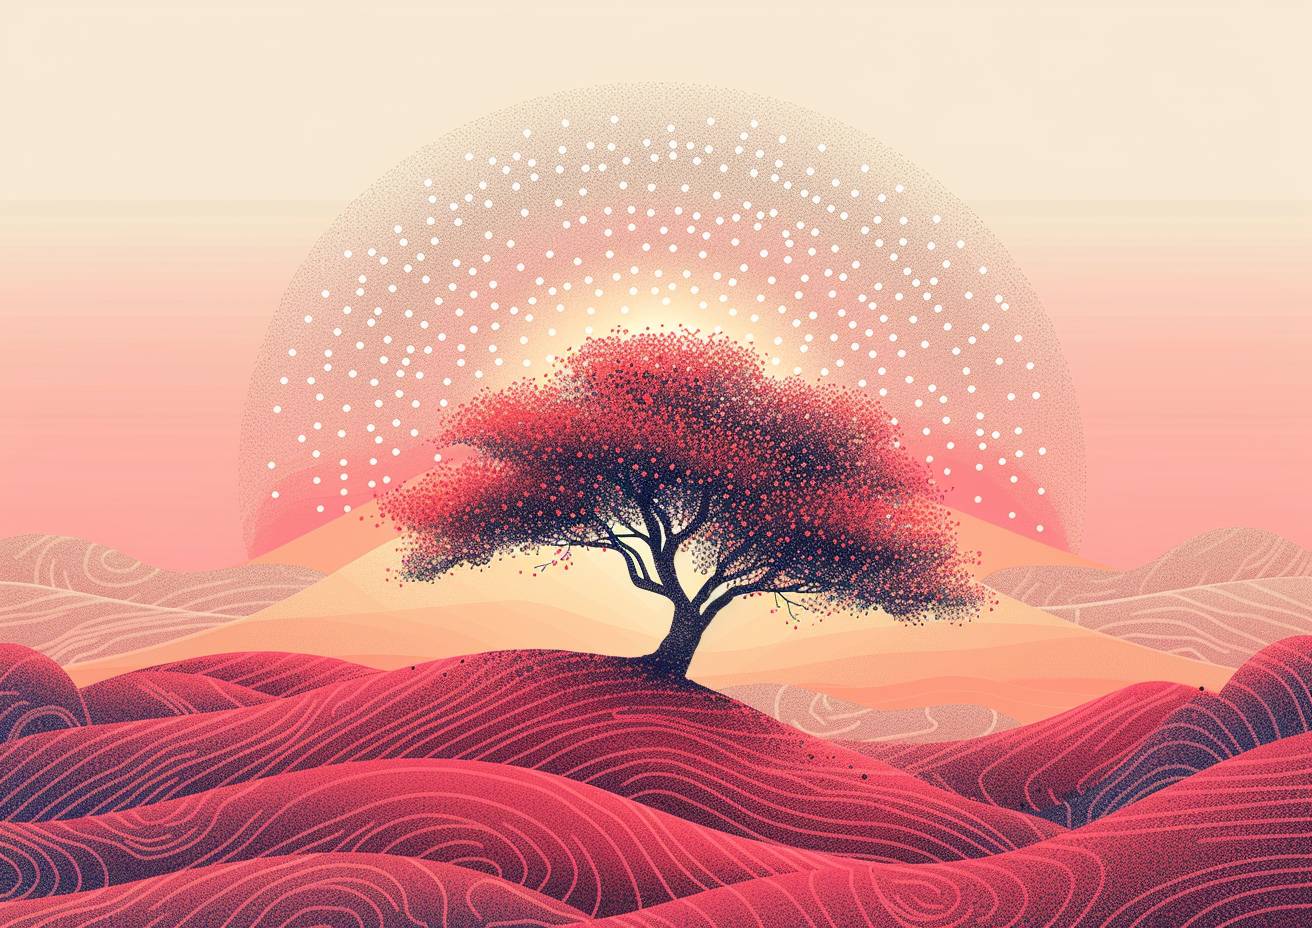 A vector illustration on a blank canvas, using pink and white phosphor dots of different sizes, forming a tree of life, rolling hills, negative space